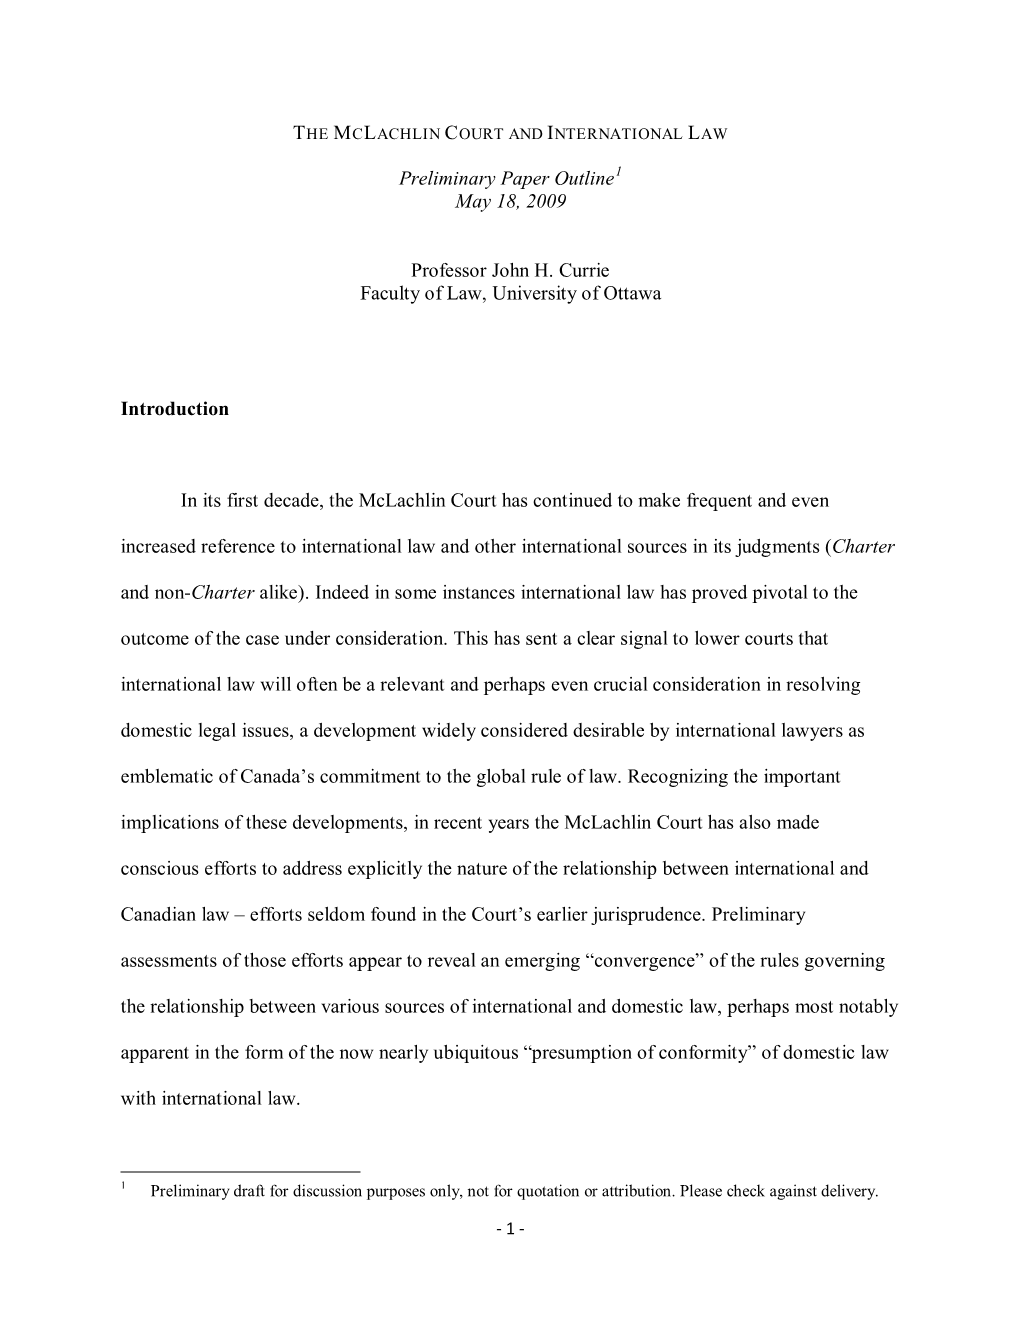 Preliminary Paper Outline May 18, 2009 Professor John H. Currie